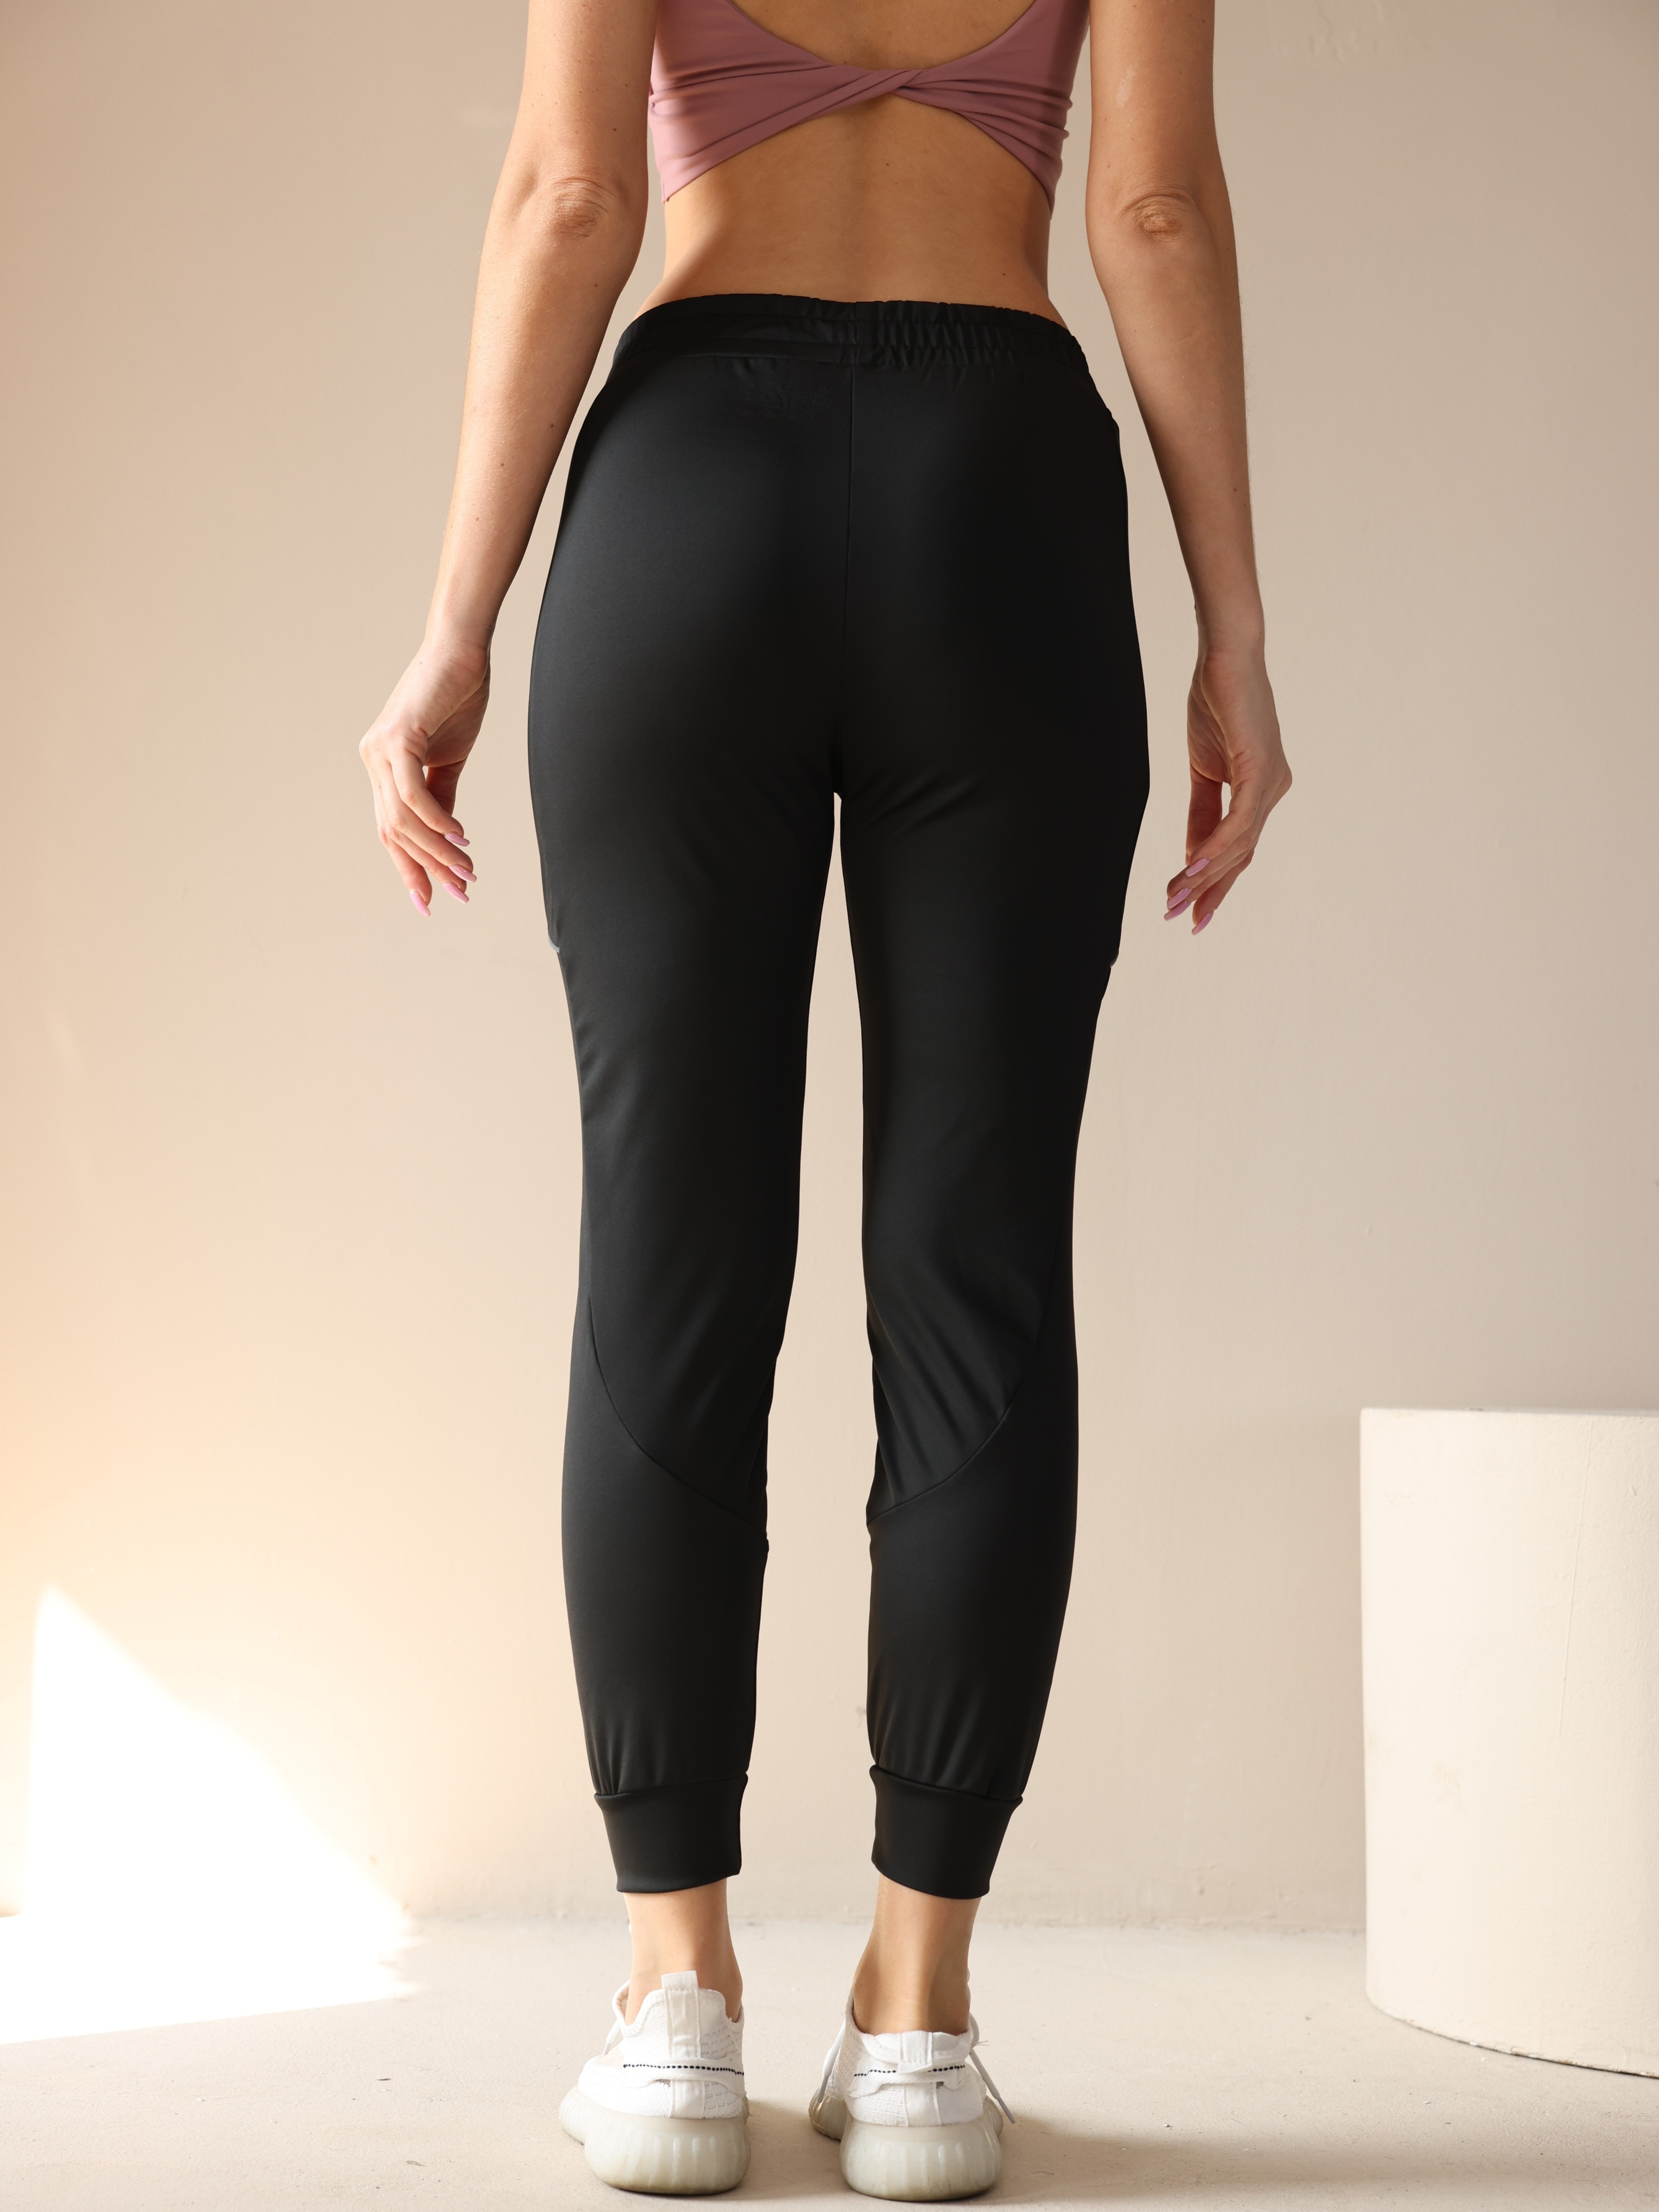 Best Deal for Workout Pants for Women high Waisted Bottom Joggers with